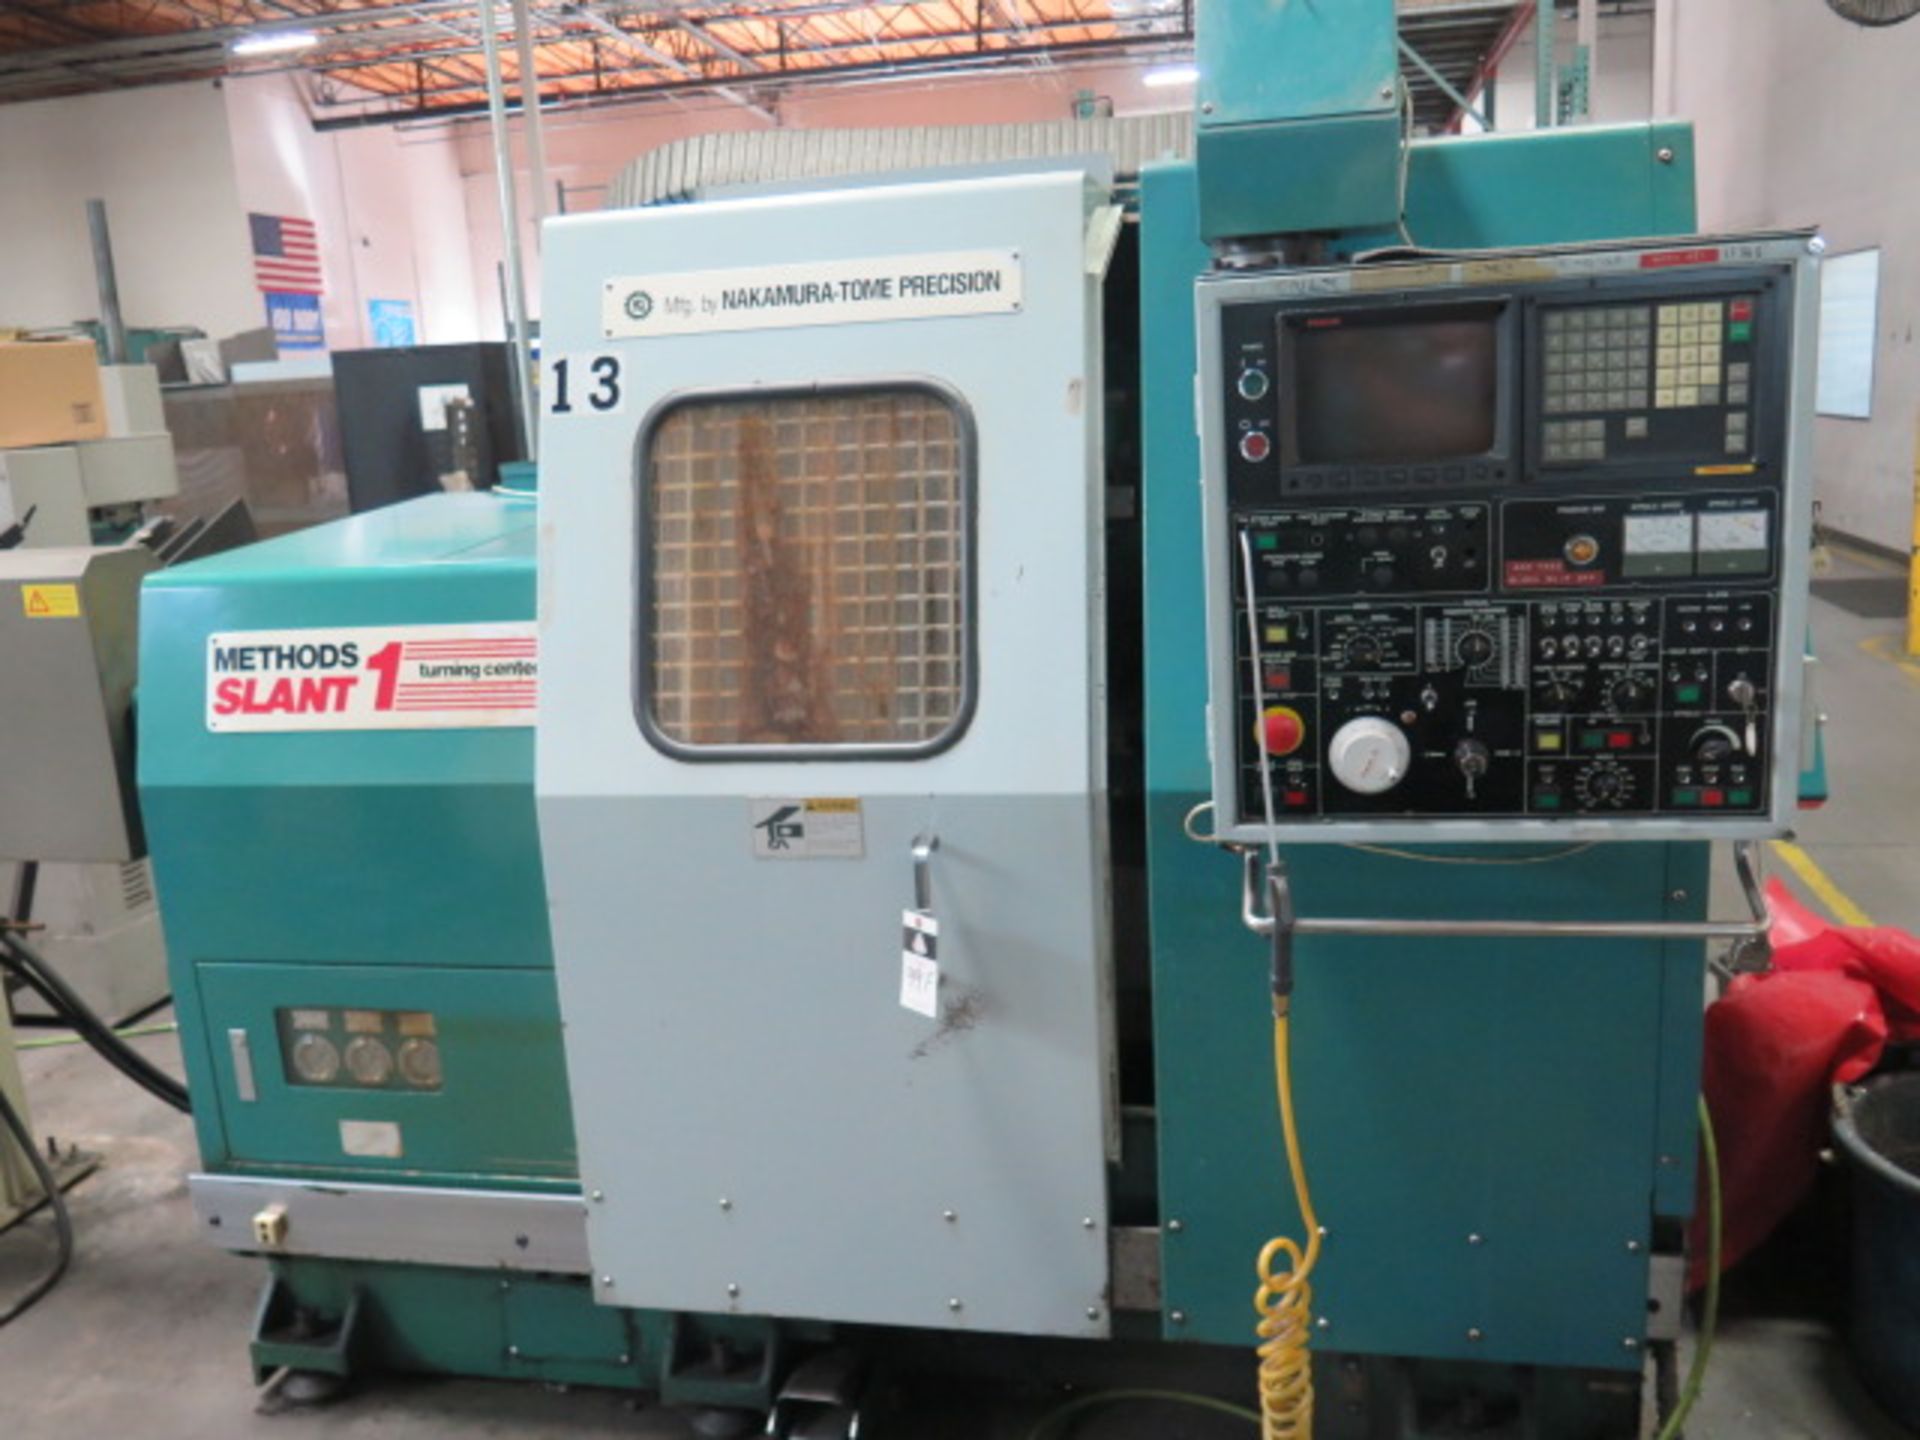 Nakamura Tome Methods Slant 1 CNC Turning Center s/n C24610 w/ Fanuc 11T, SOLD AS IS, LIVERMORE CA - Image 2 of 13